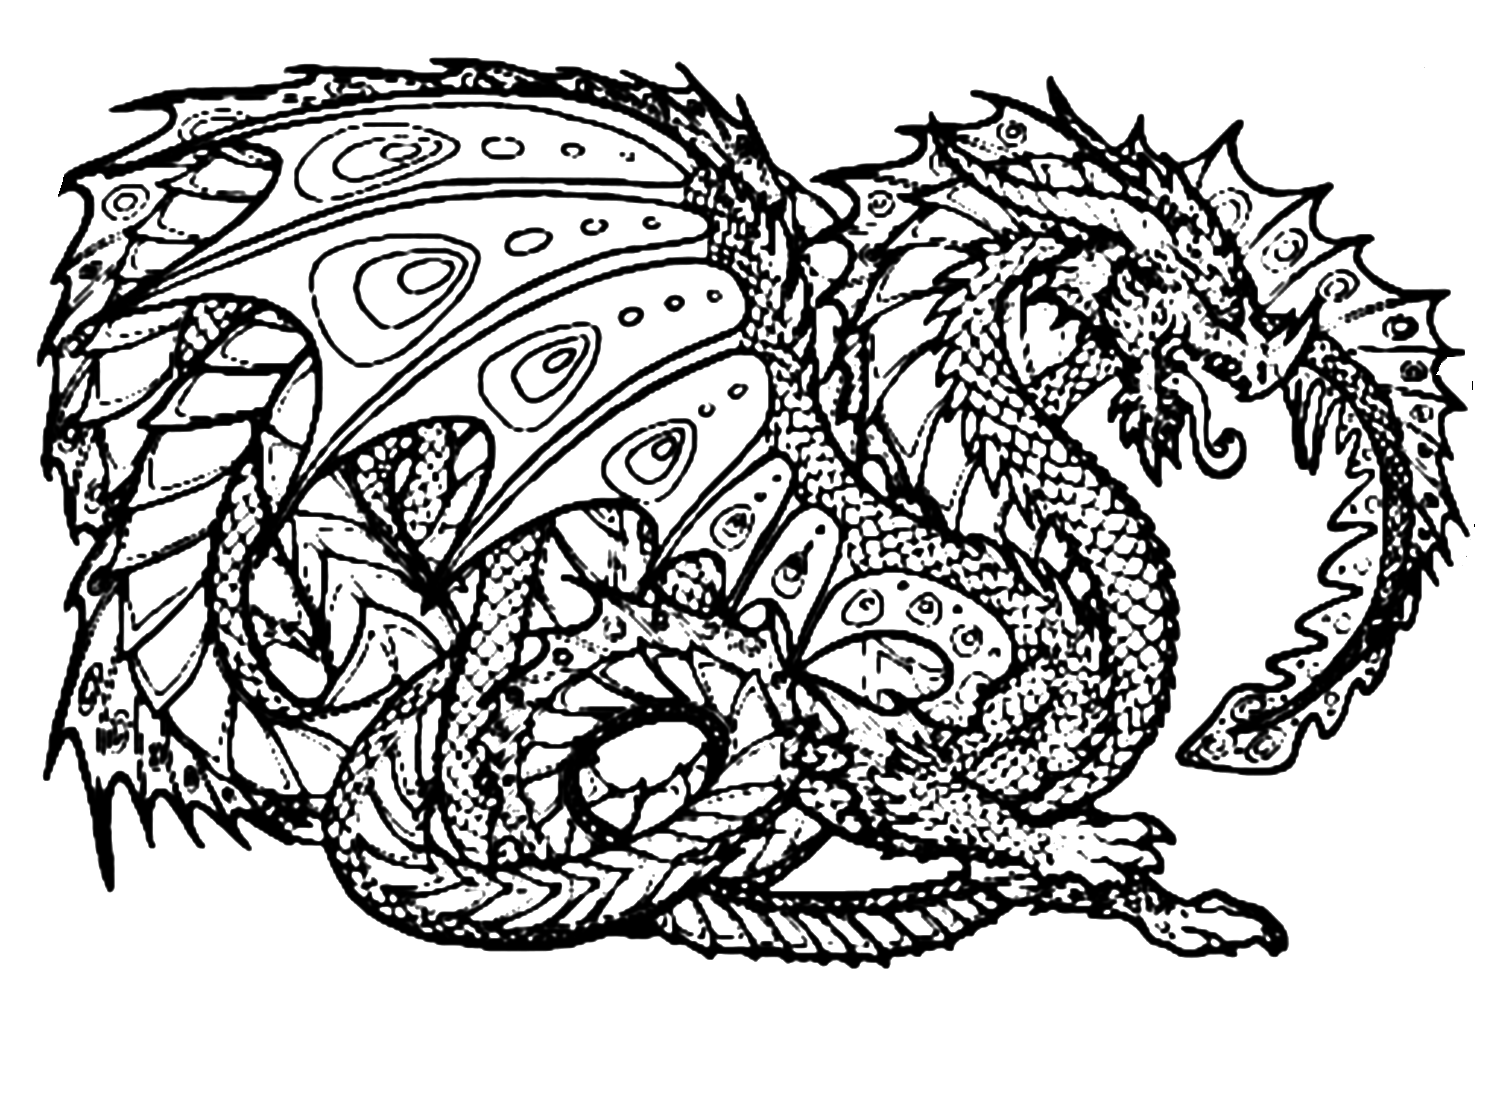 Dragon Coloring Pages - Coloring Pages For Kids And Adults